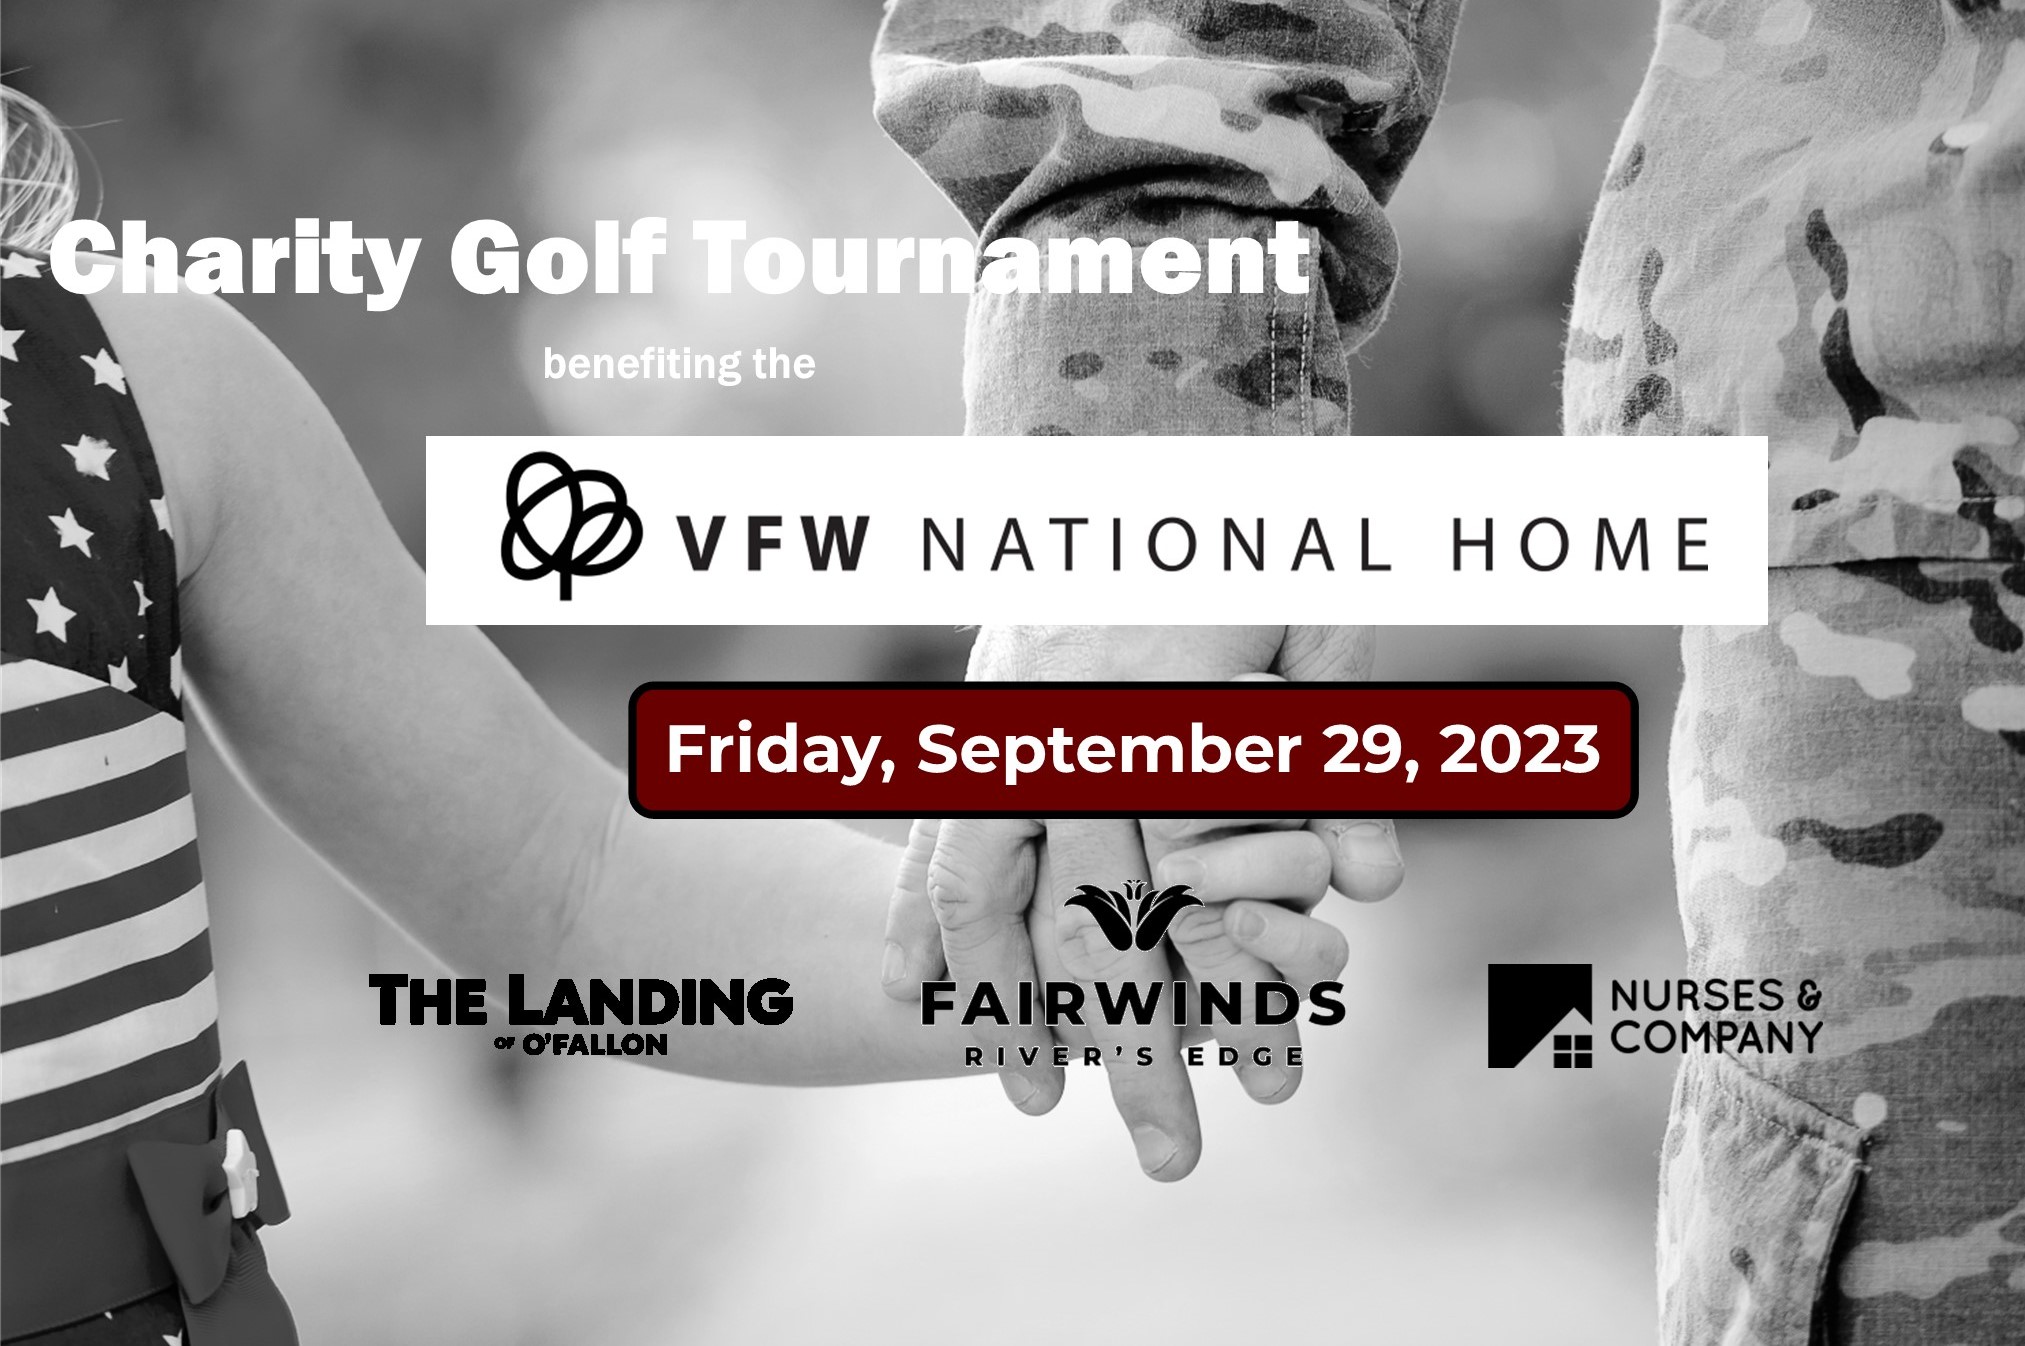 Charity Golf Tournament for Veterans National Home